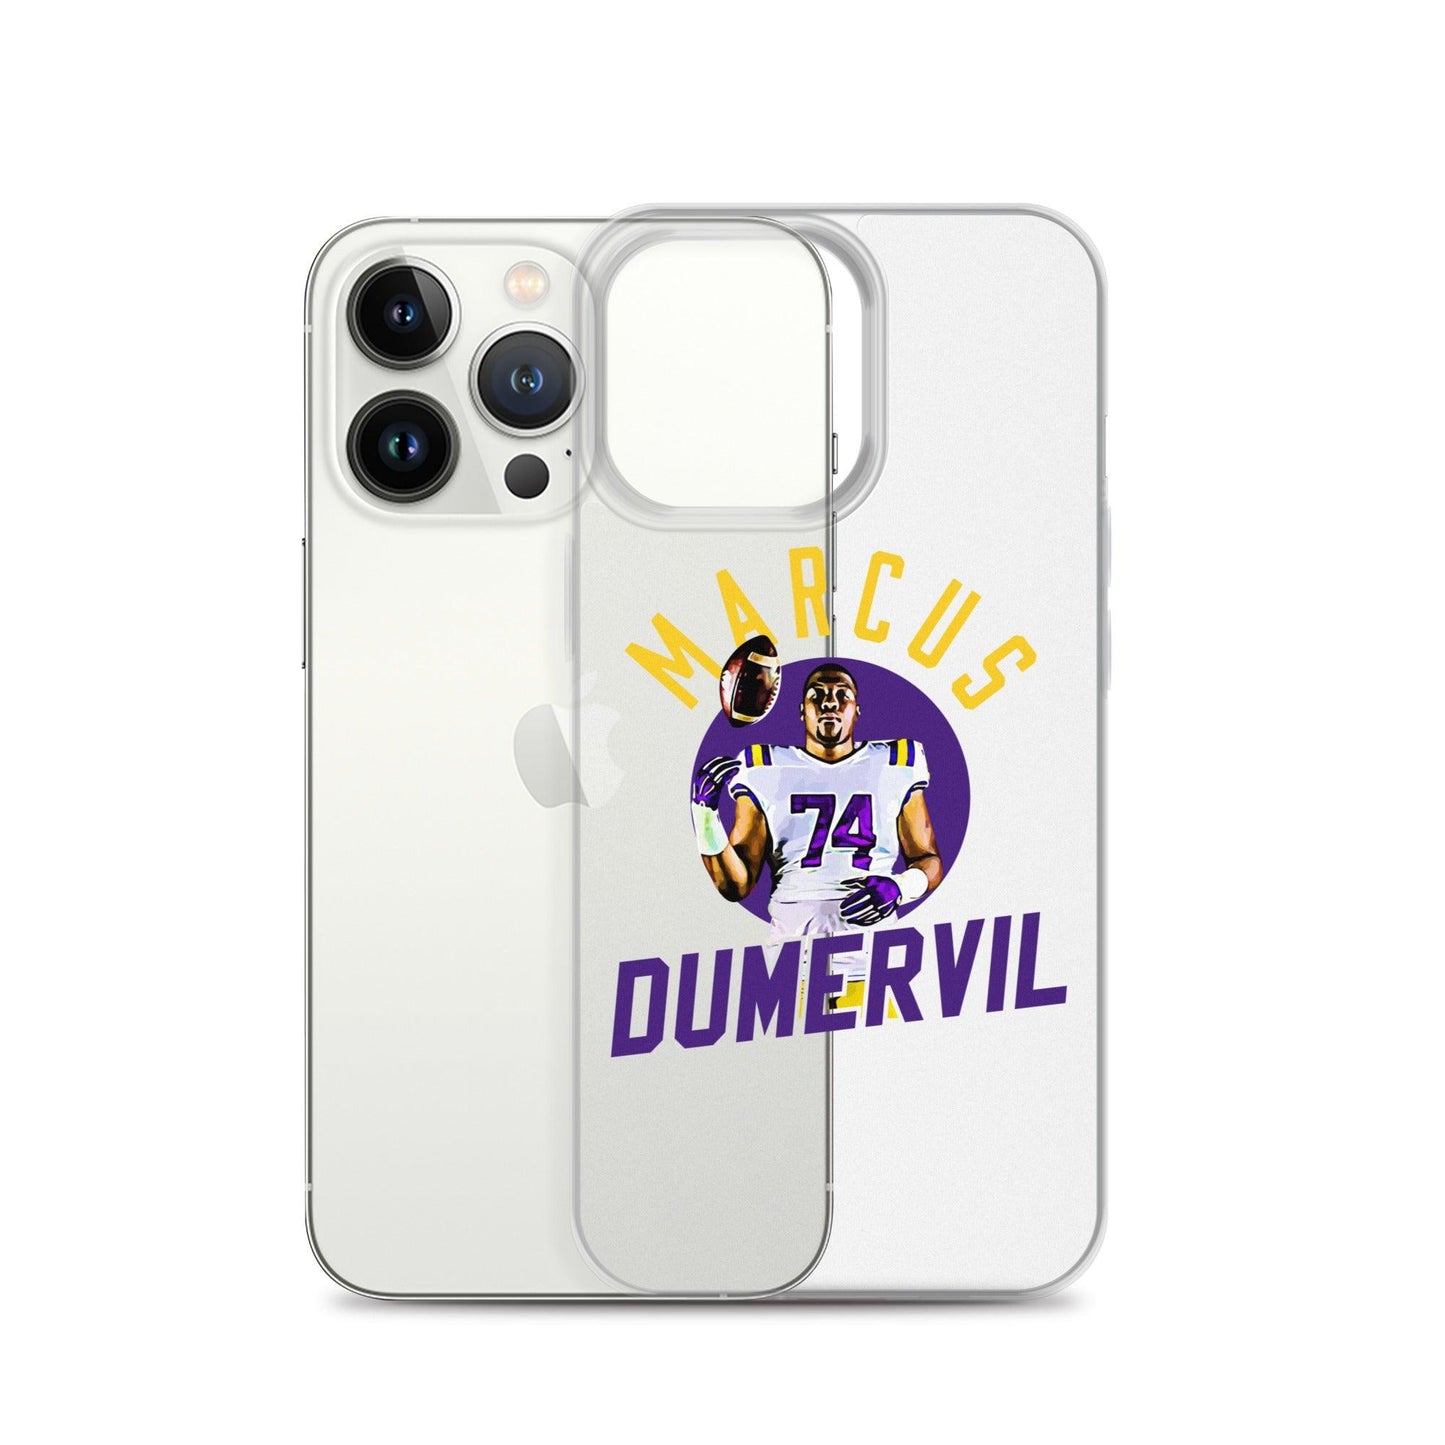 Marcus Dumervil "Game Ready" iPhone Case - Fan Arch